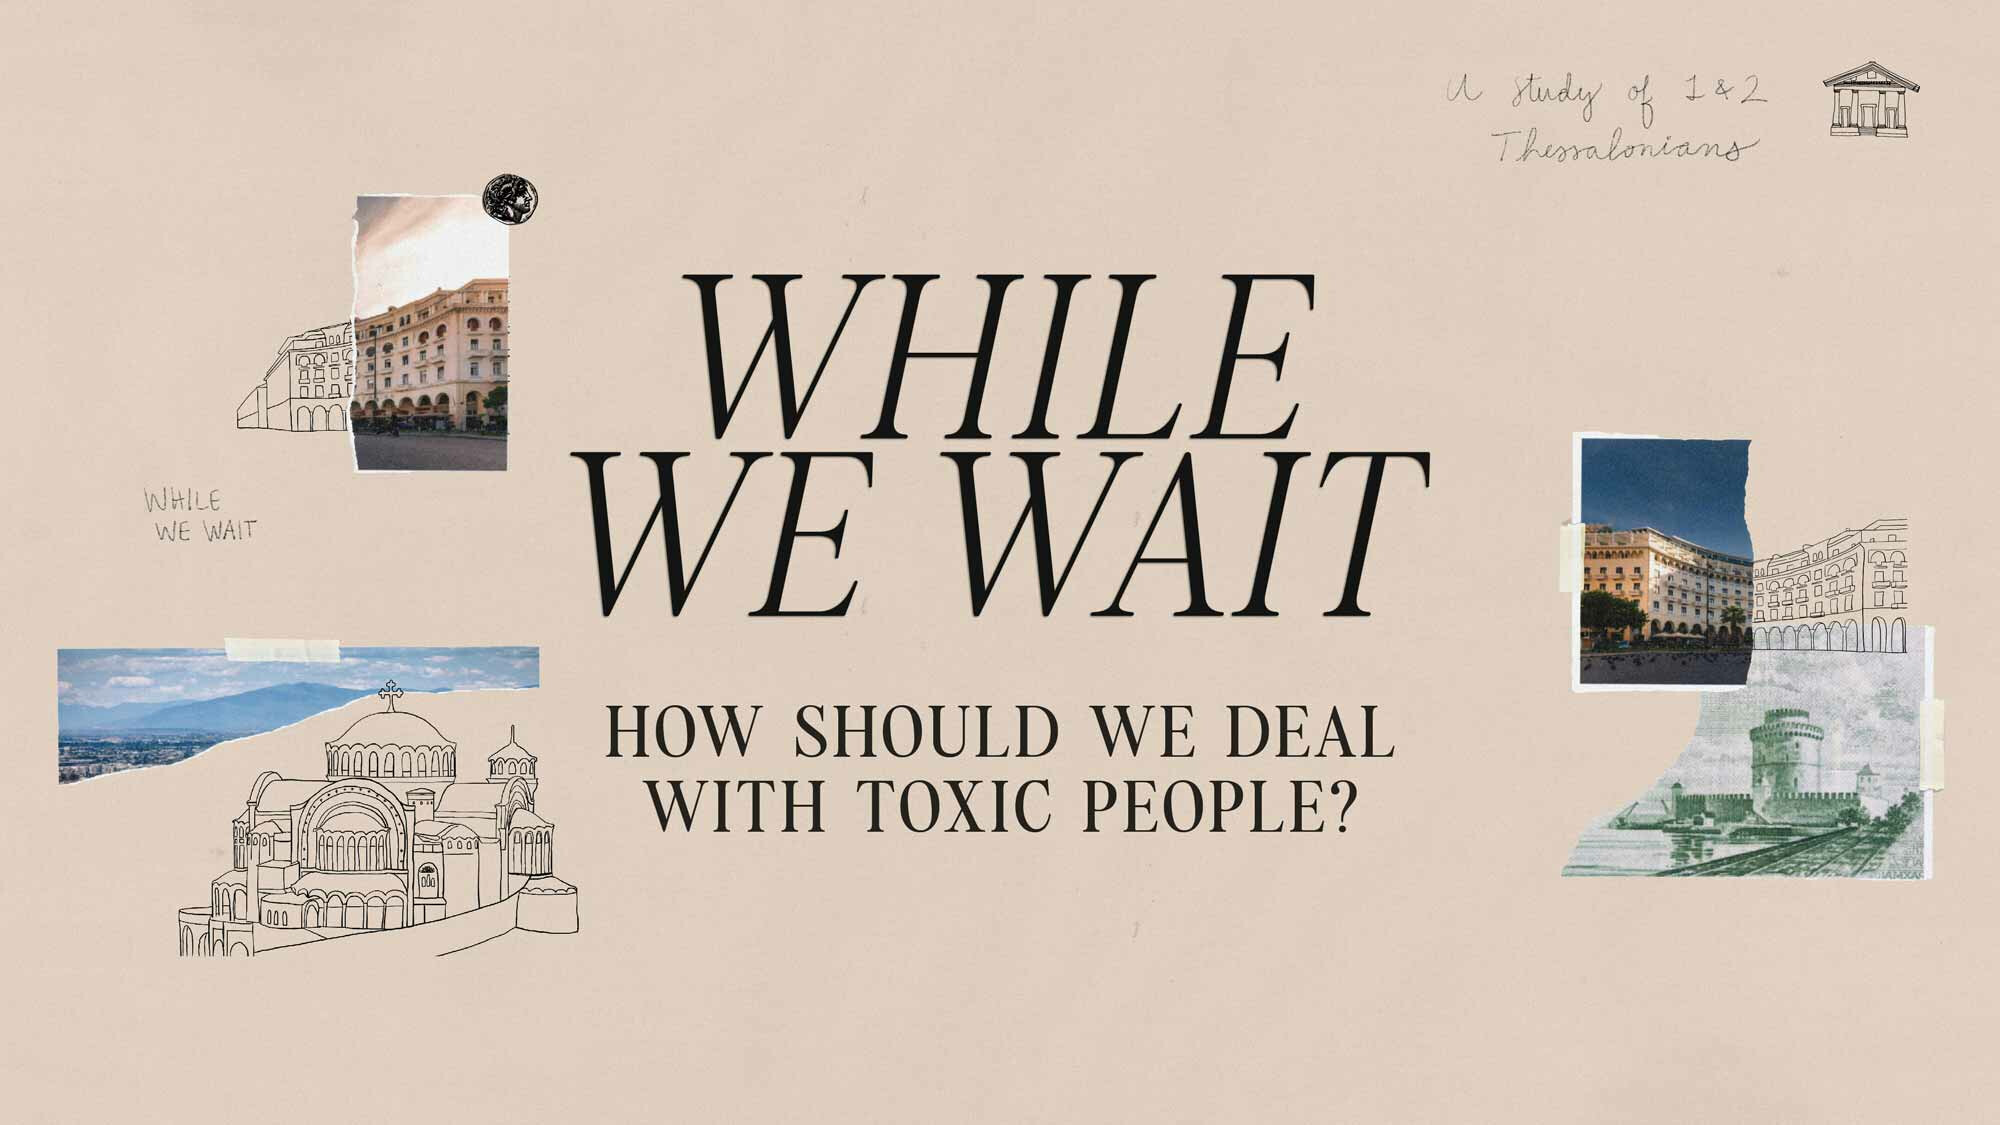 How should we deal with toxic people?